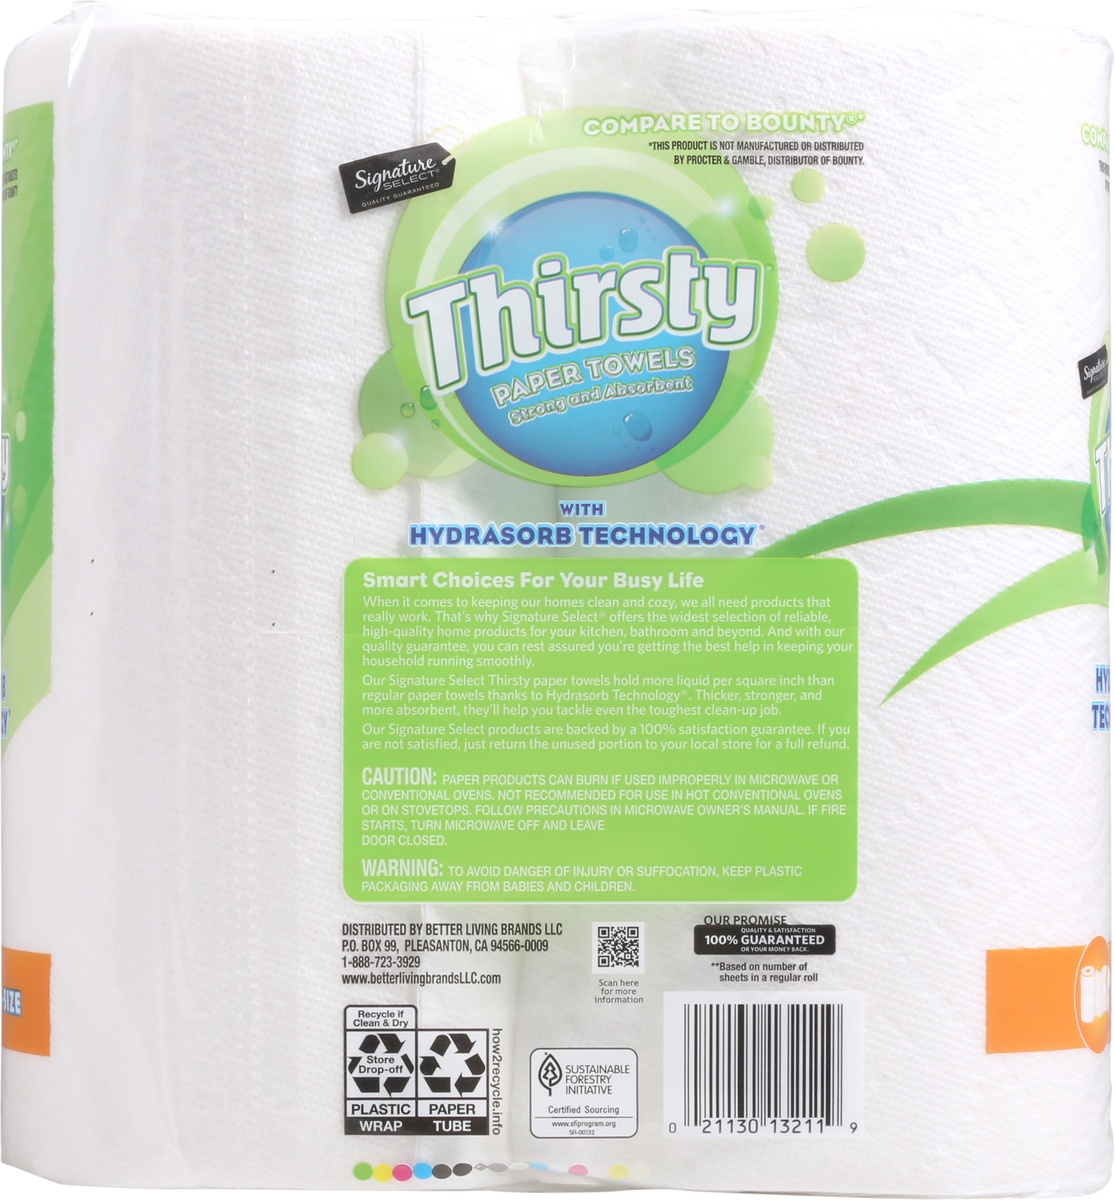 slide 4 of 9, Signature Select Thirsty Vari-A-Size 2 Ply Paper Towels 2 246 2 ea, 